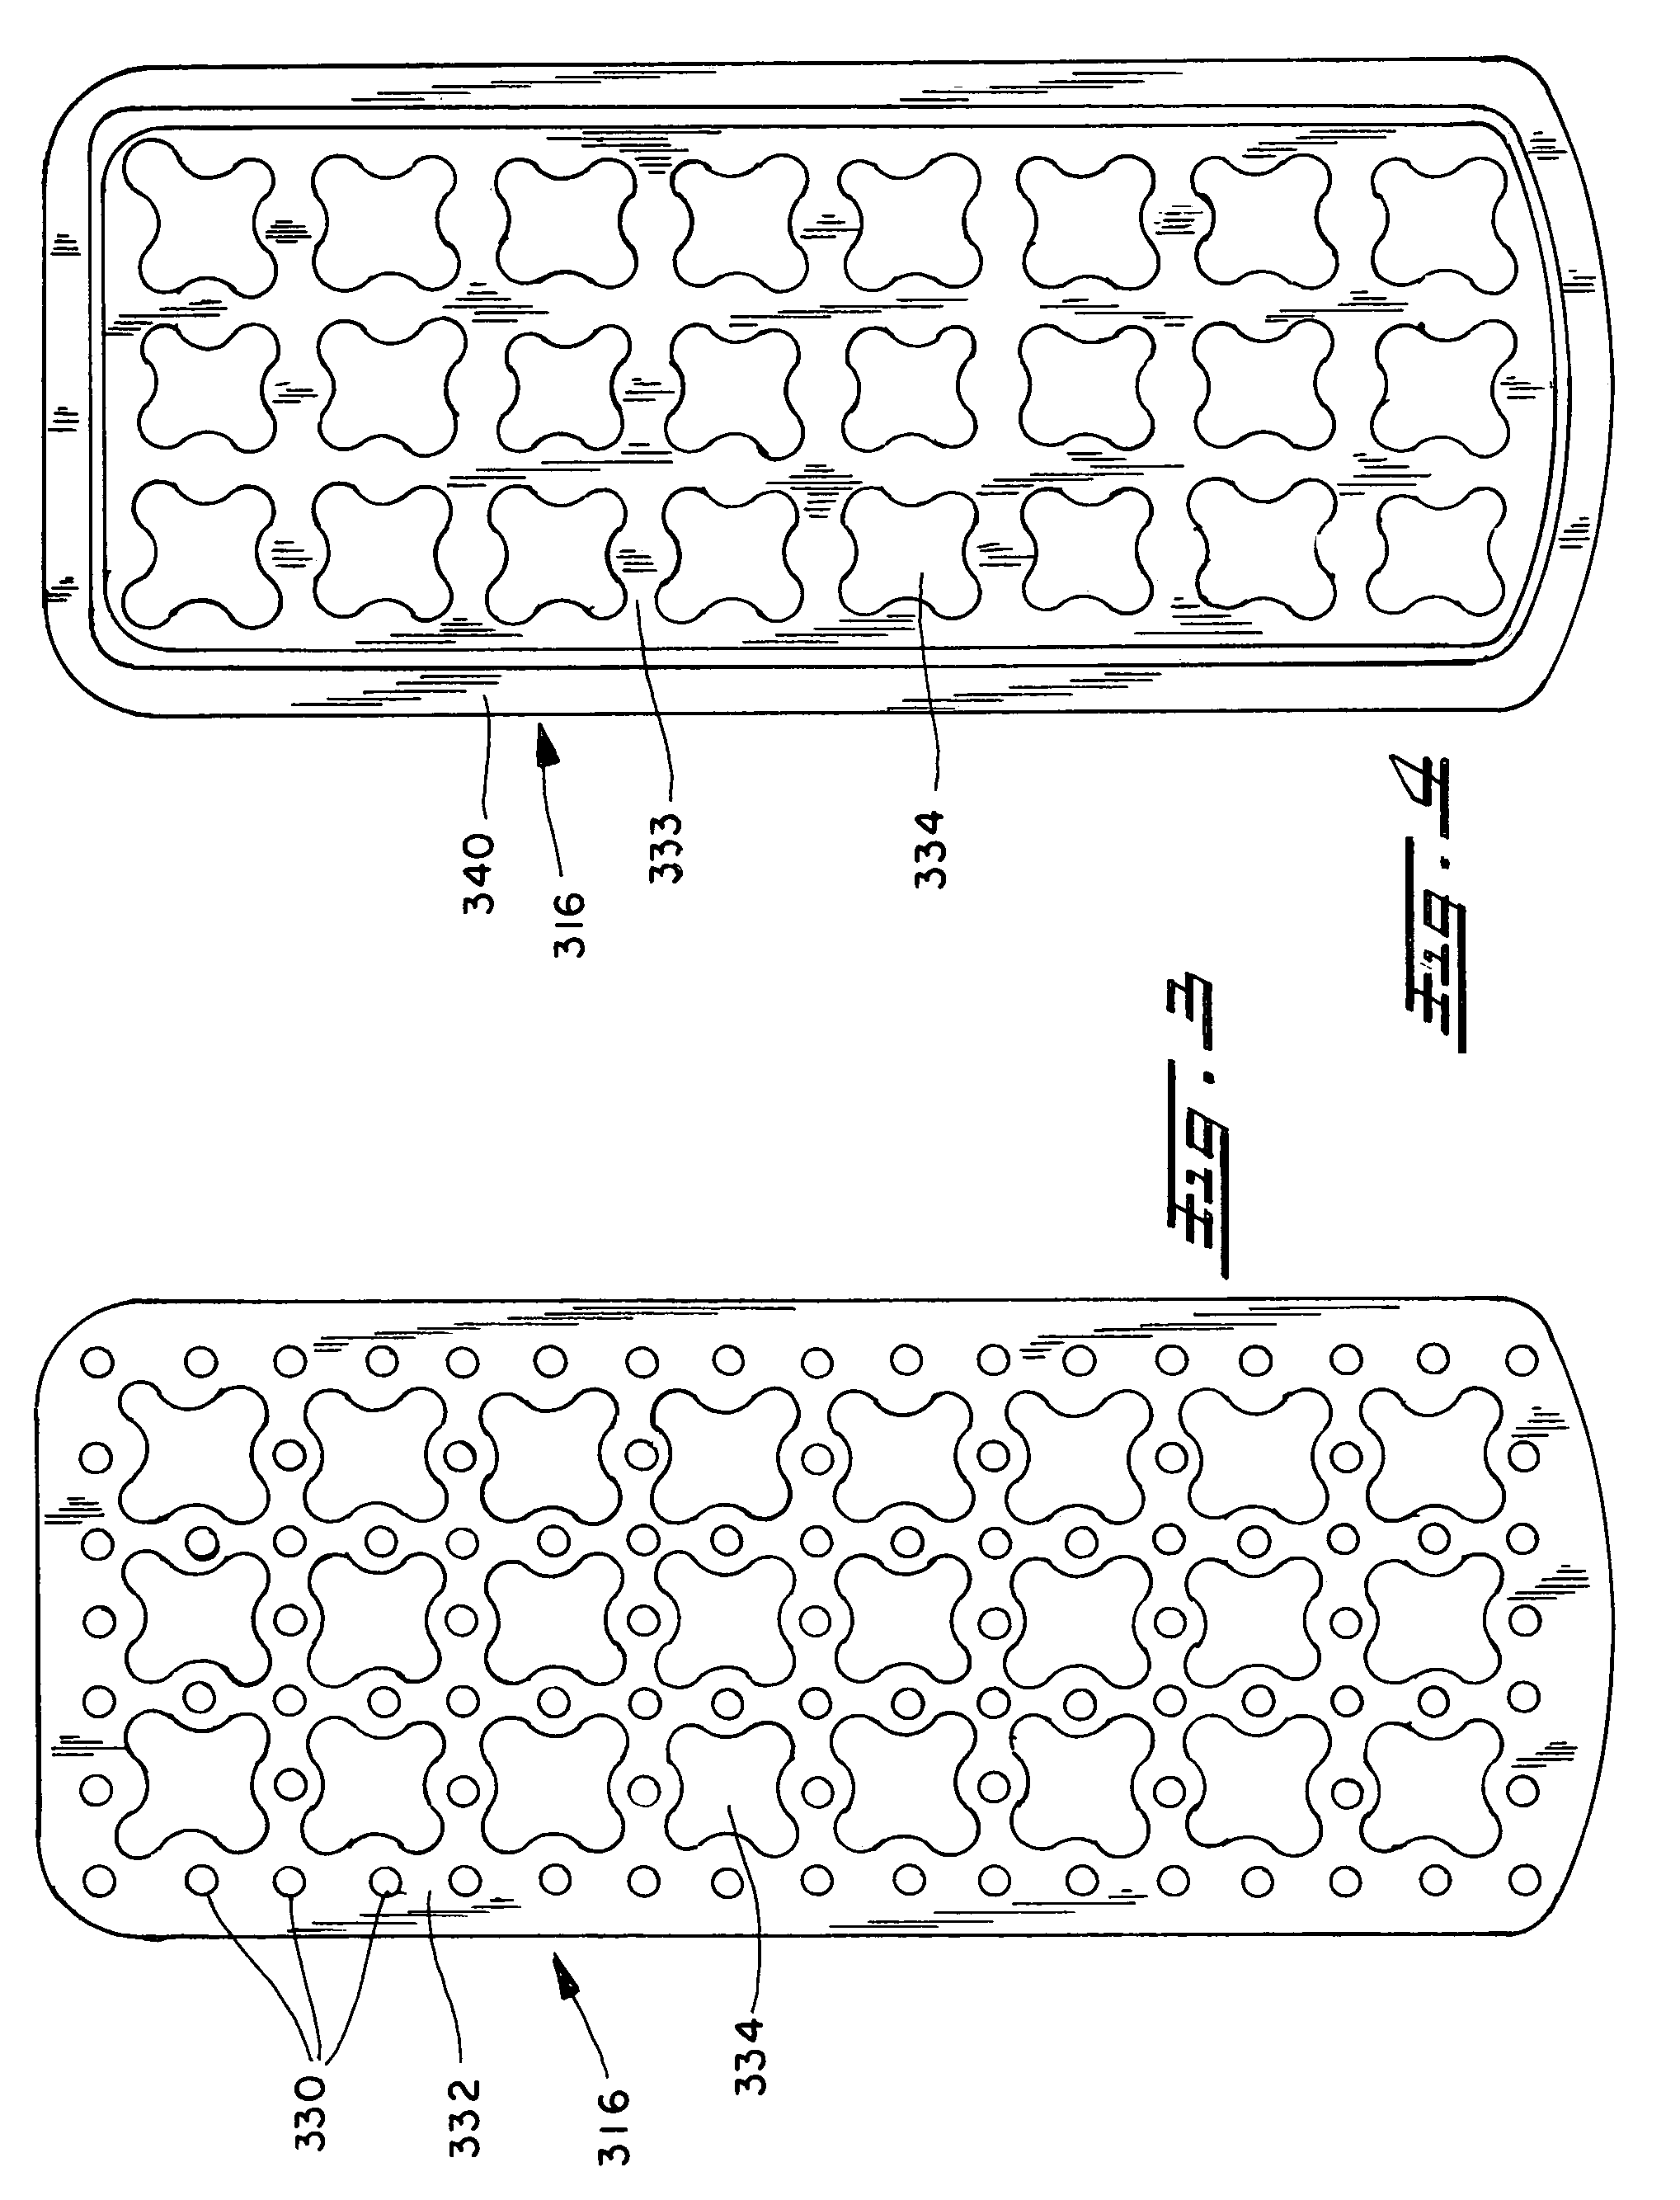 System and method for management of hair and personal hygiene